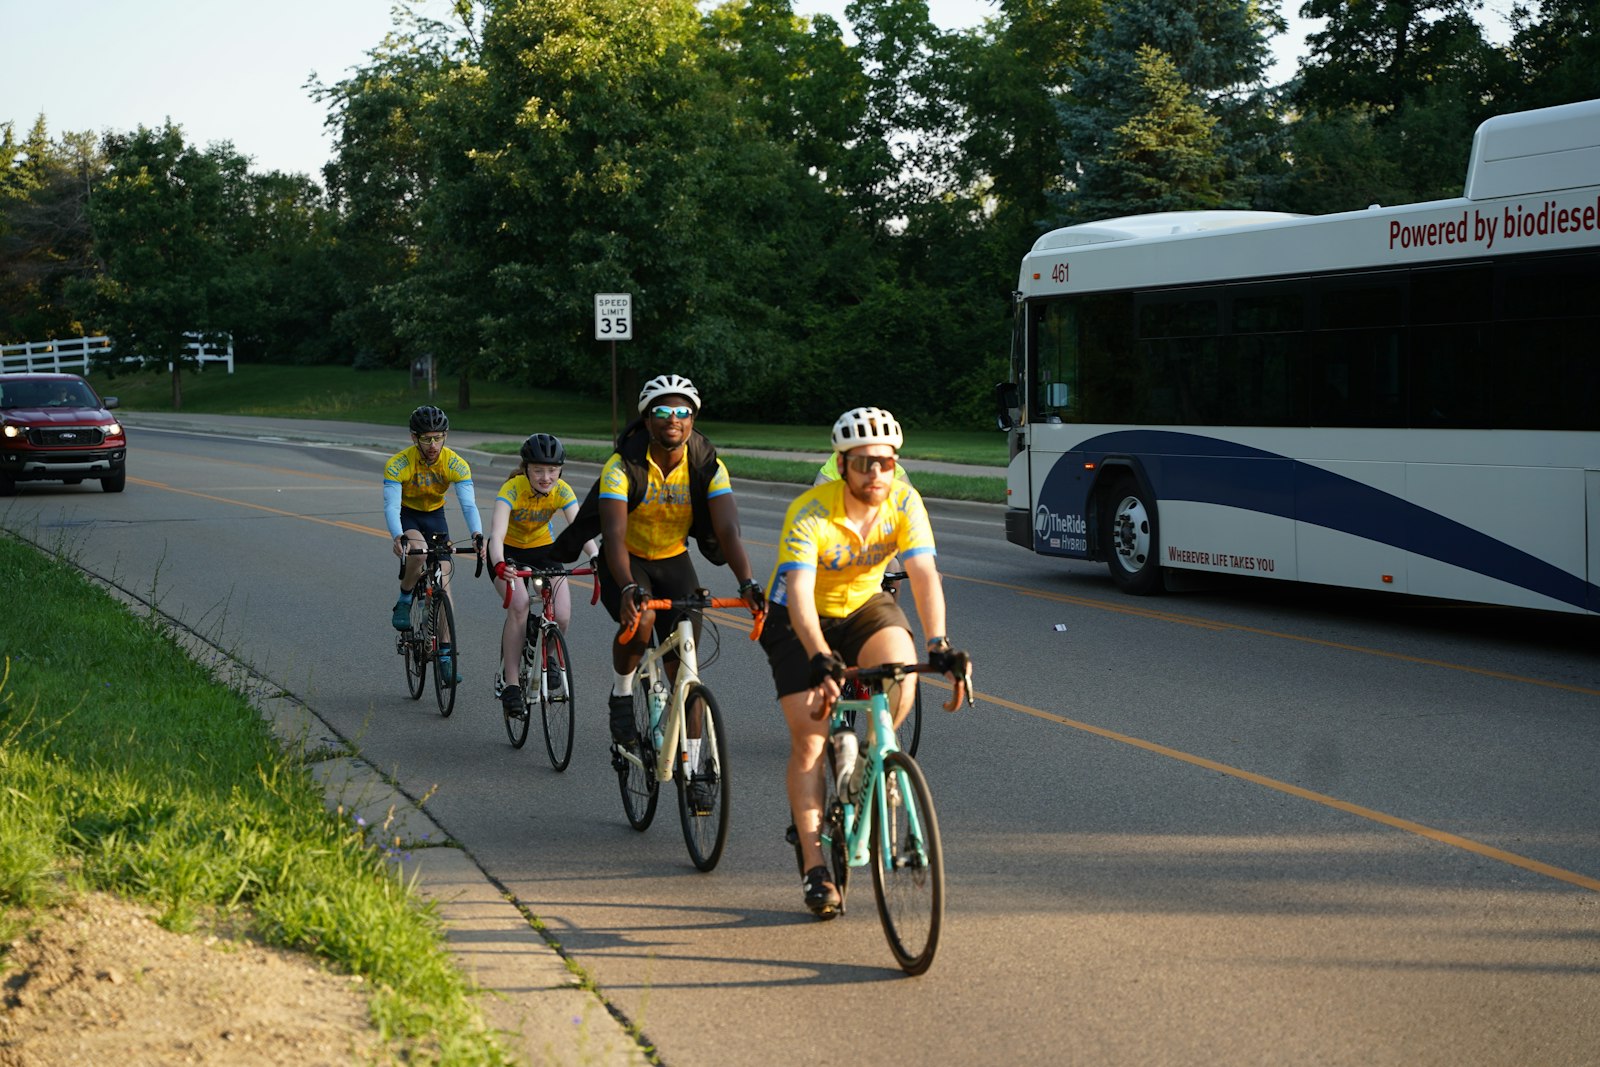 The Biking for Babies Michigan route team makes their way along Green Road in Ann Arbor, during the first day of their journey that will take them from Our Lady of Good Counsel in Plymouth to a host family in Hillsdale.